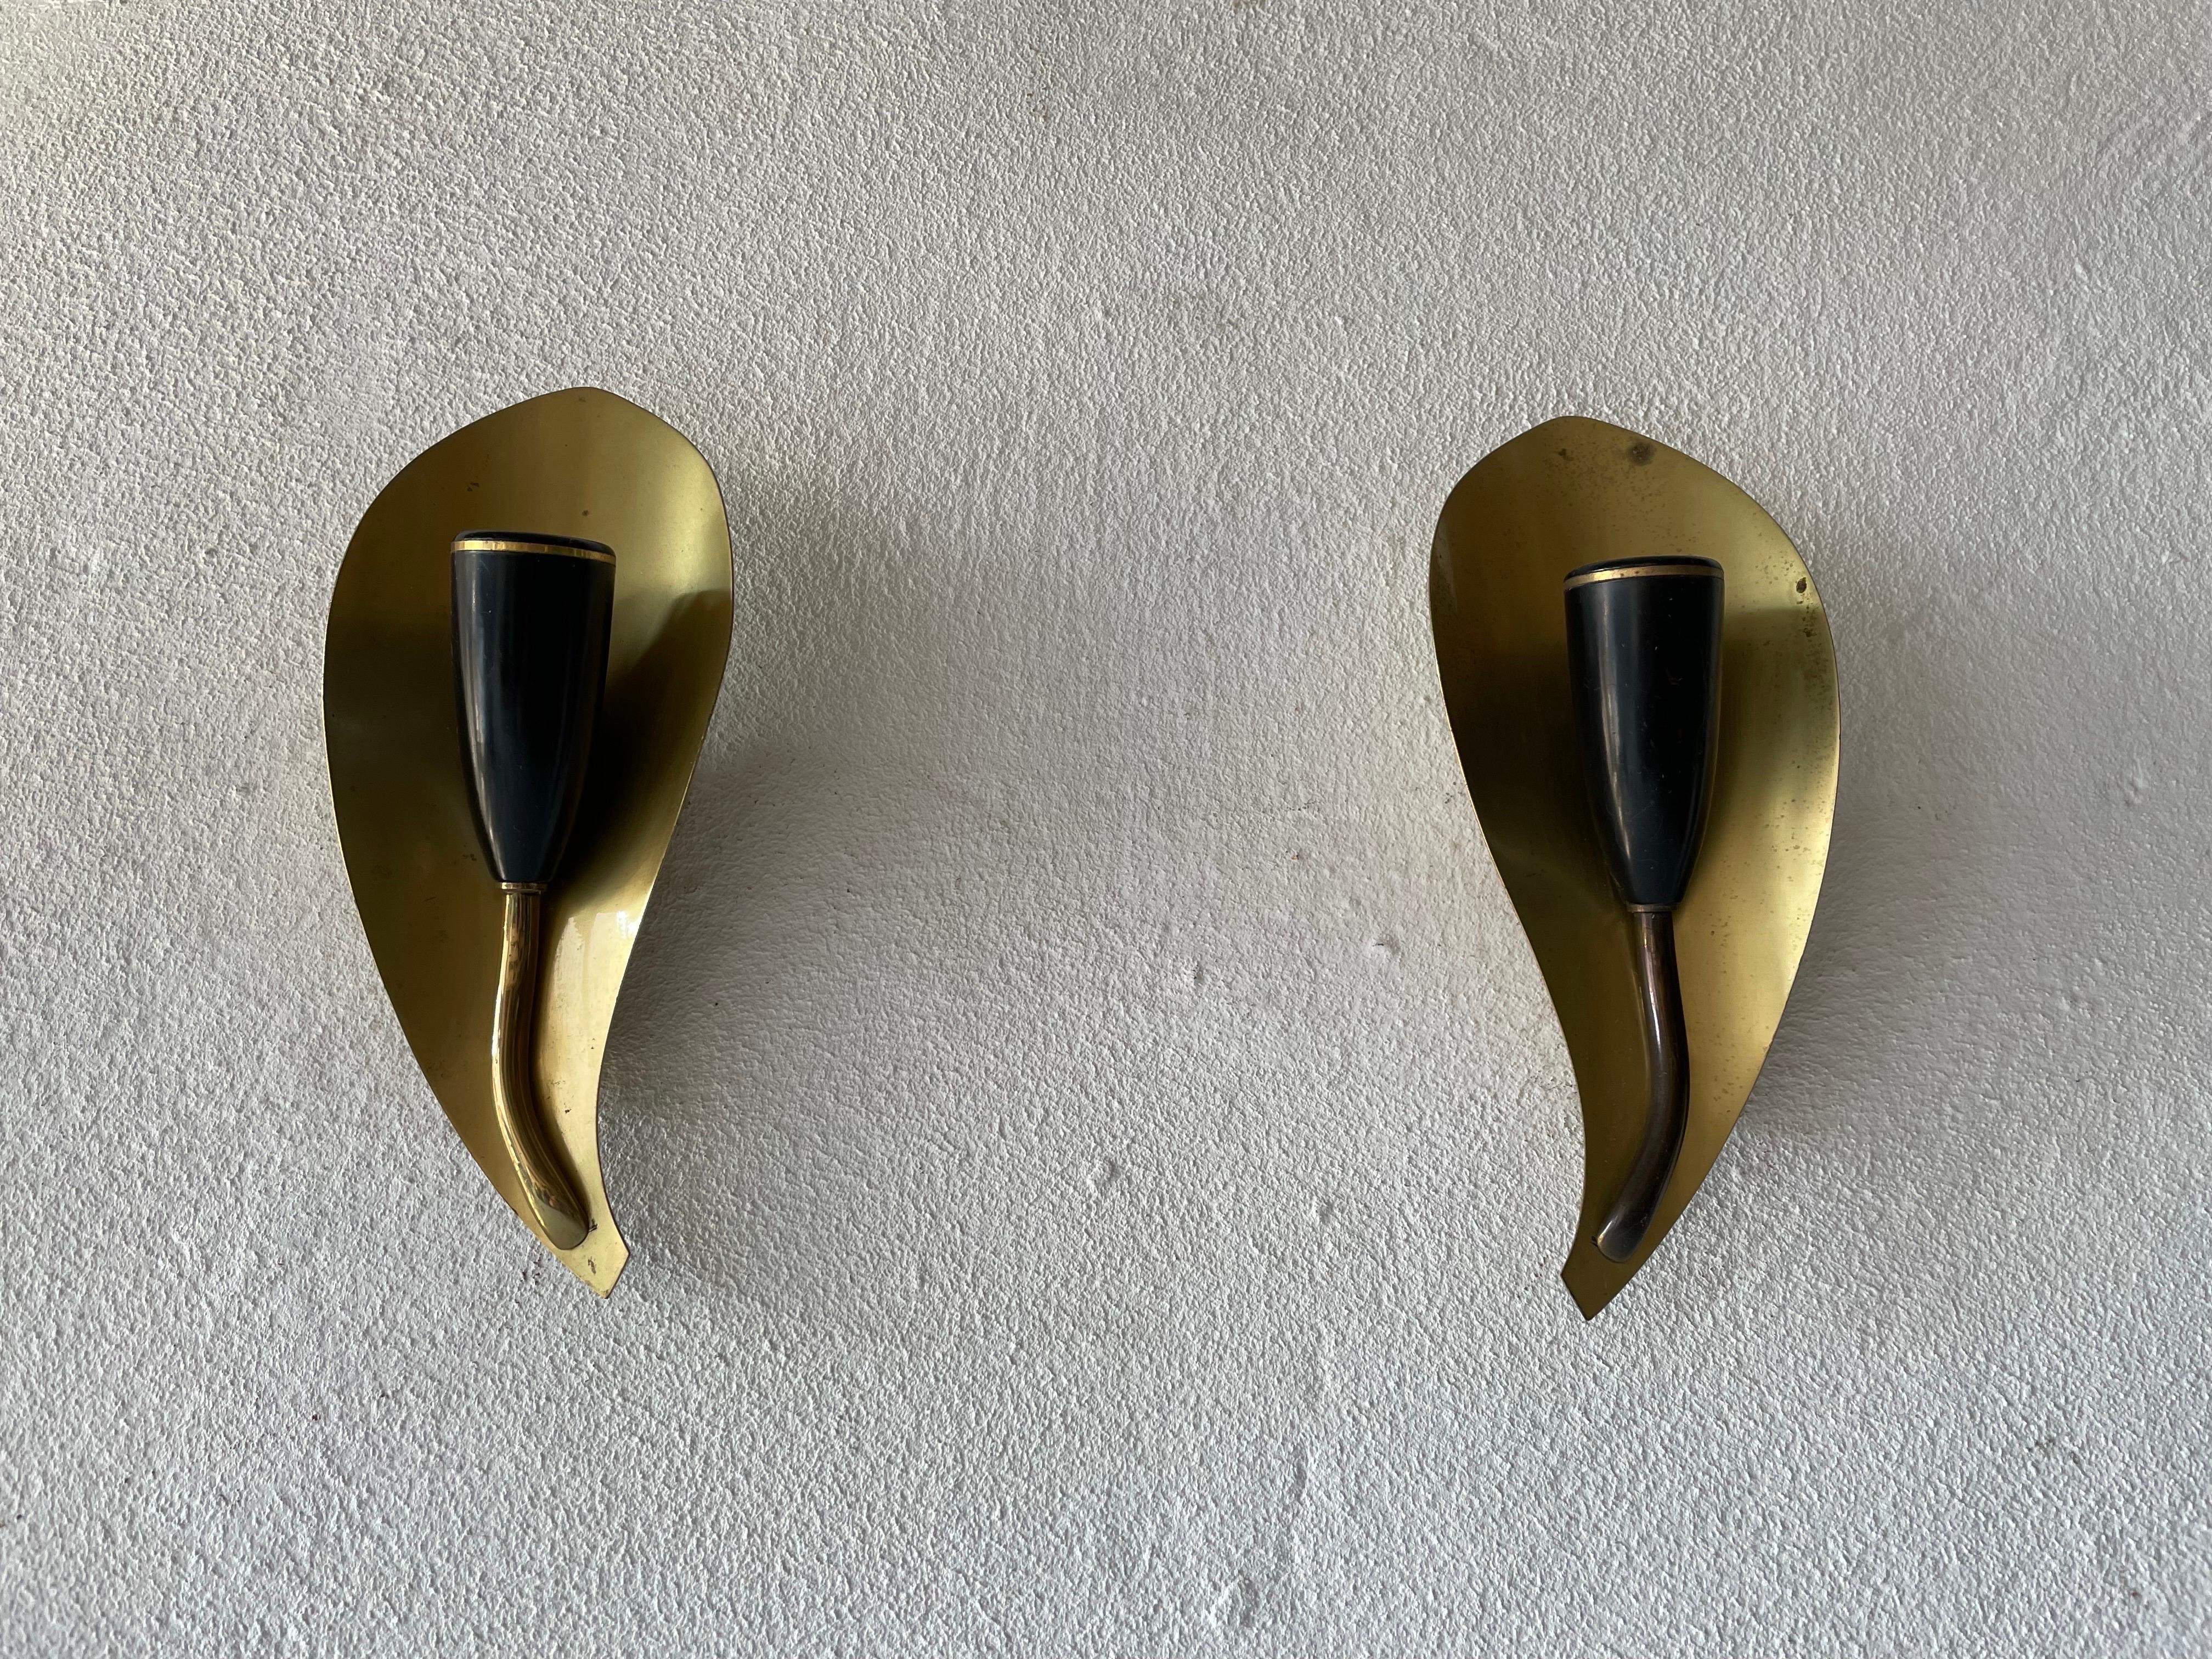 Mid-Century leaf shaped Pair of brass sconces, 1950s, Germany

Very elegant and Minimalist wall lamps
Lamp is in very good condition.

These lamps works with E14 standard light bulbs. 
Wired and suitable to use in all countries. (110-220